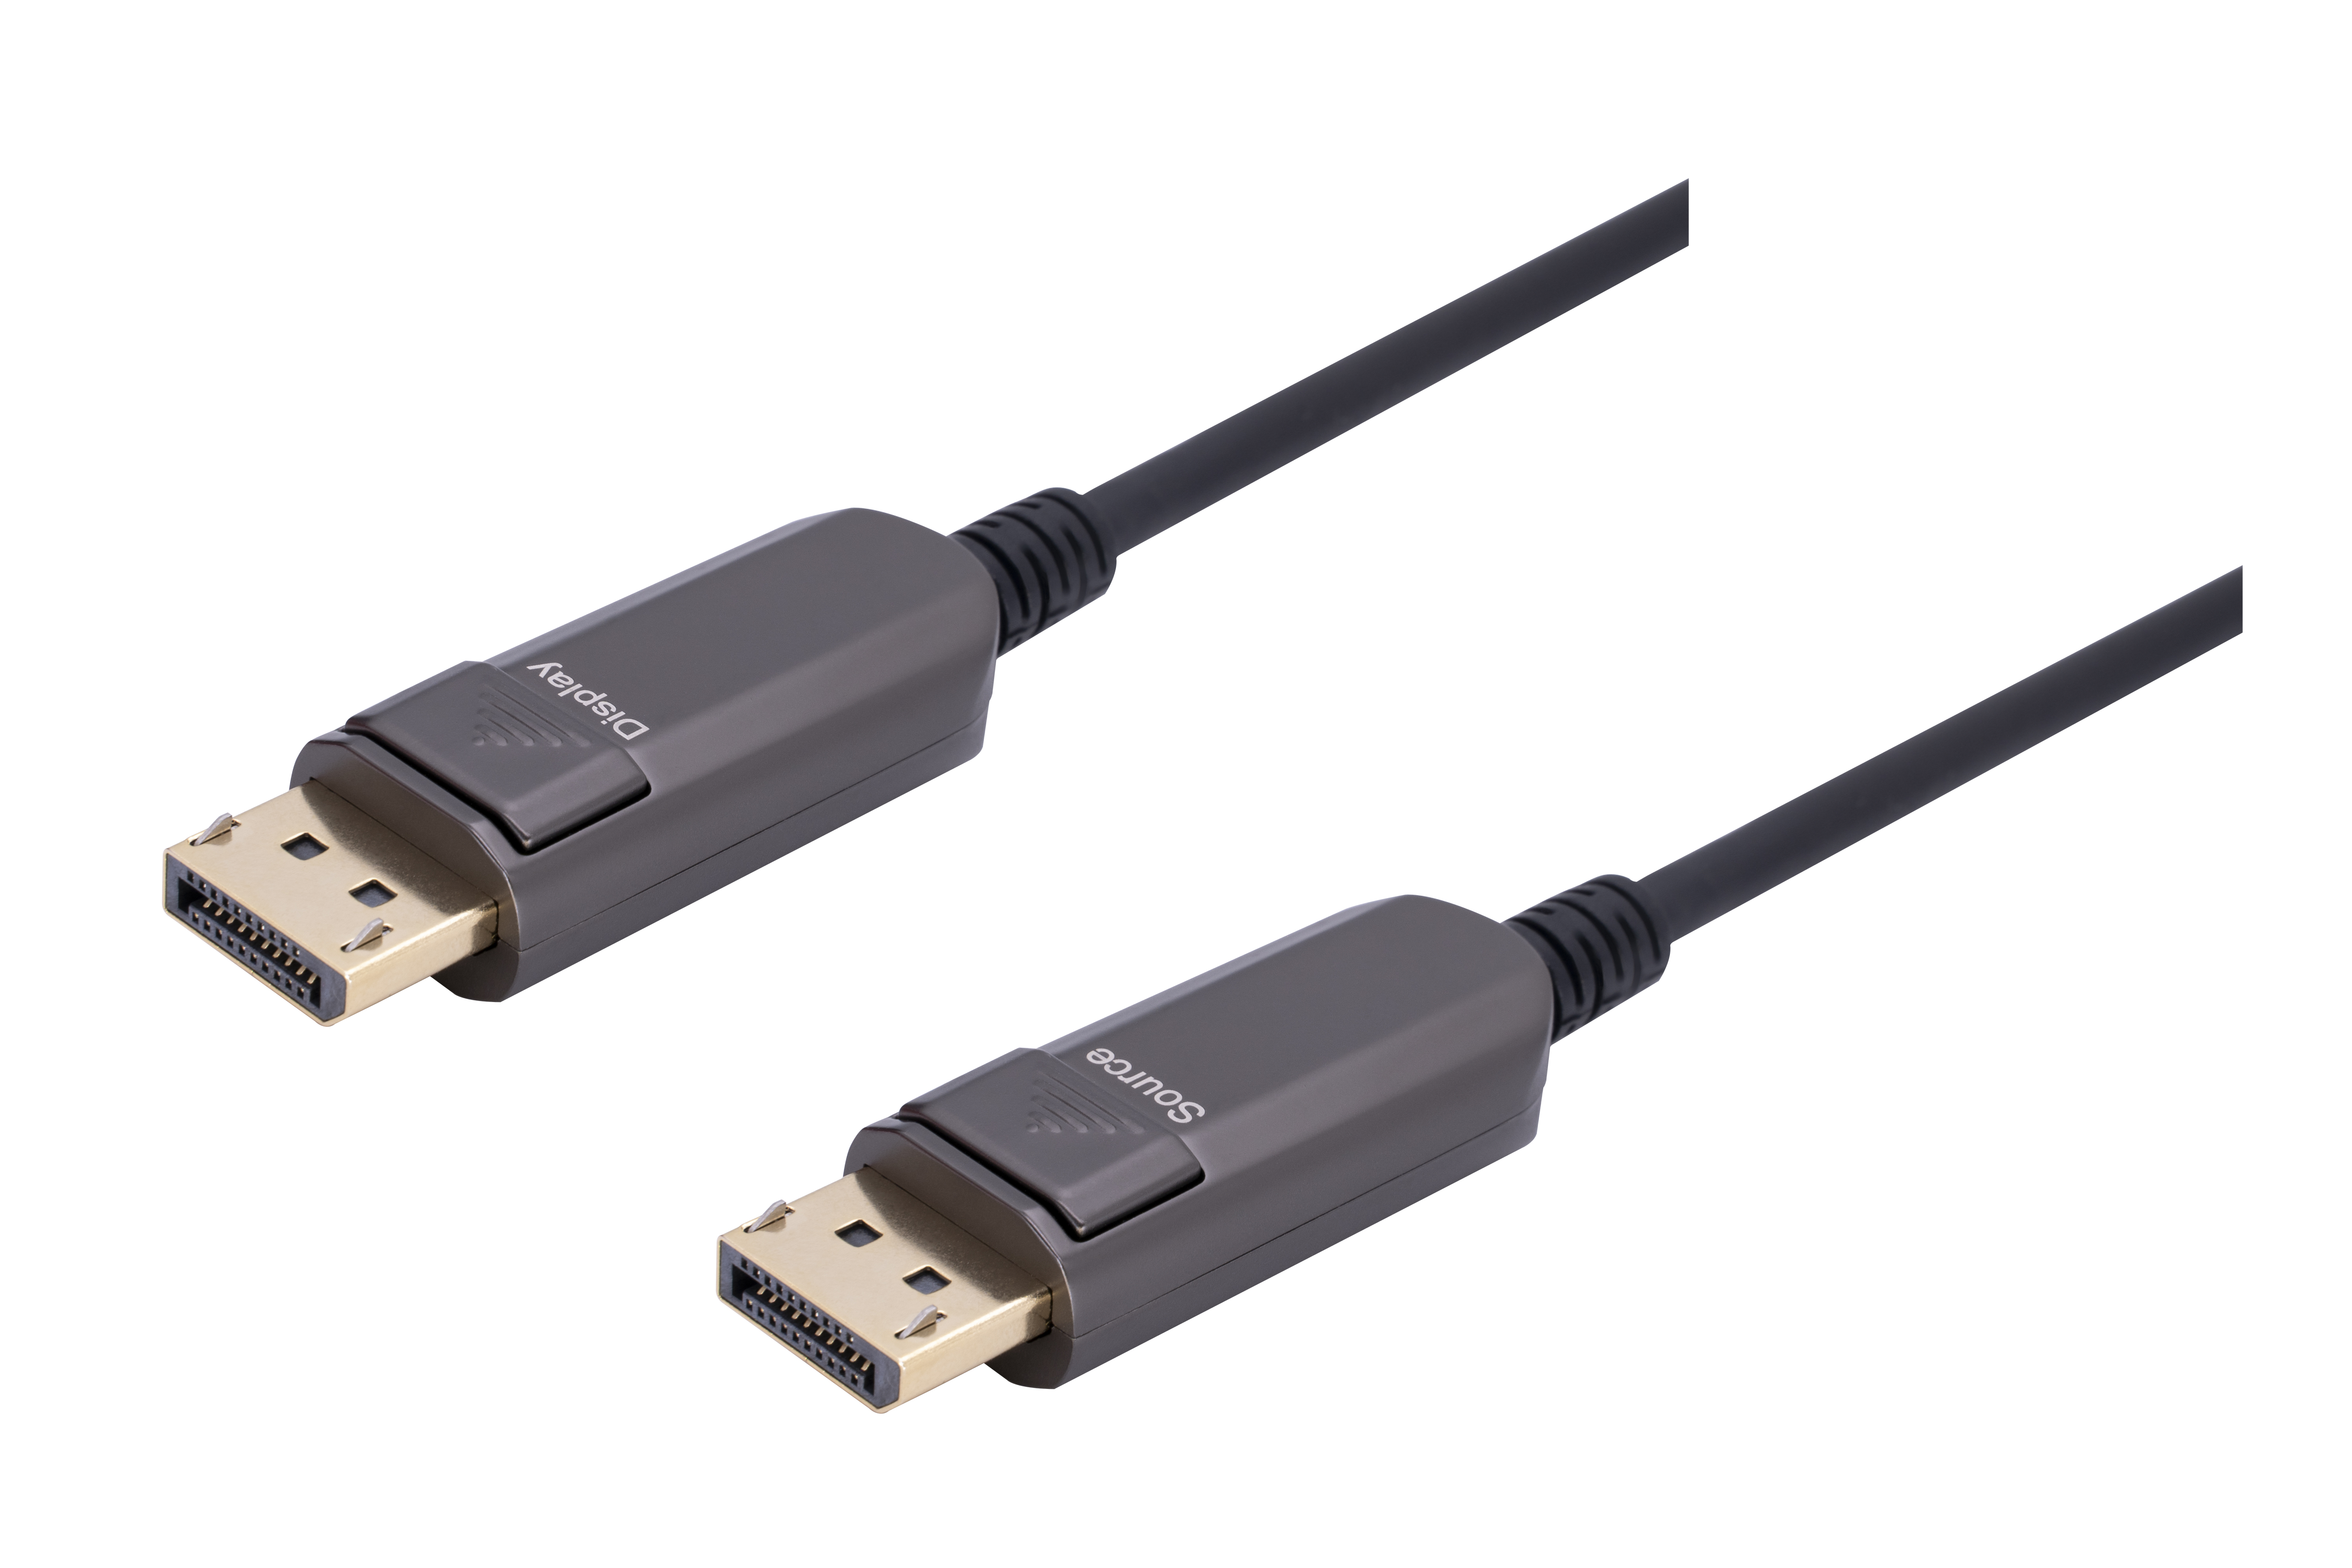 DP 1.4 Active Optical Cable